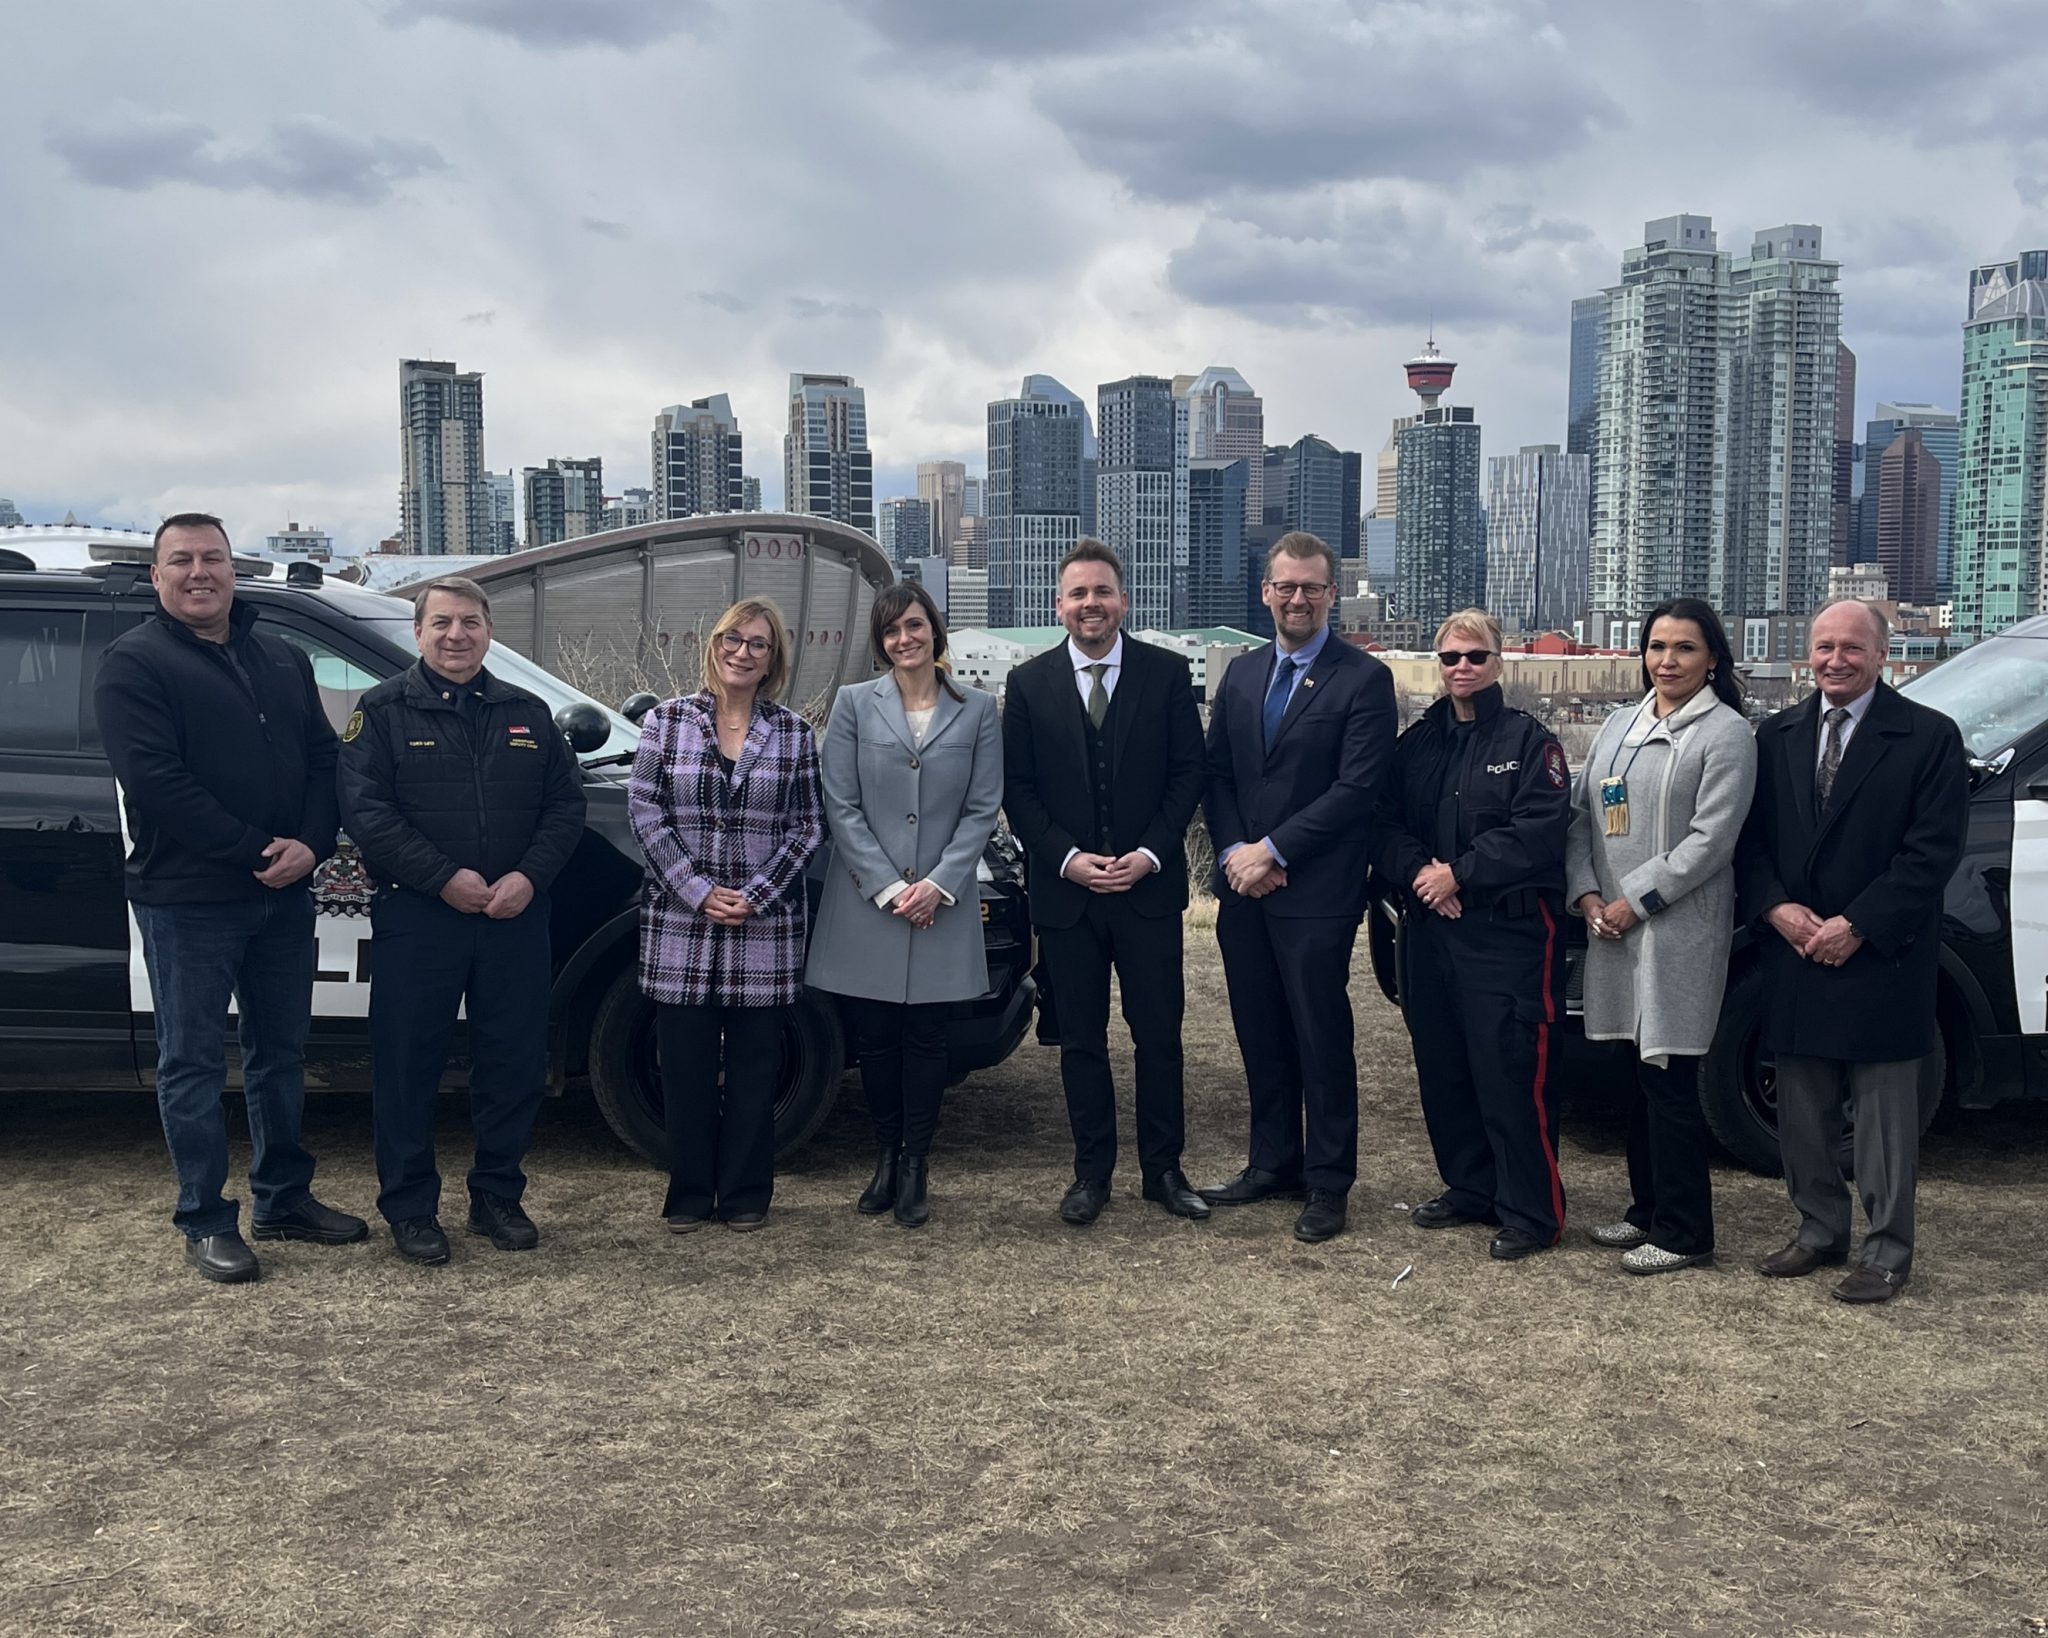 Councillor Sharp and members of the Public Safety and Community Response Task Force in front of police vehicles, with the Calgary skyline in the background